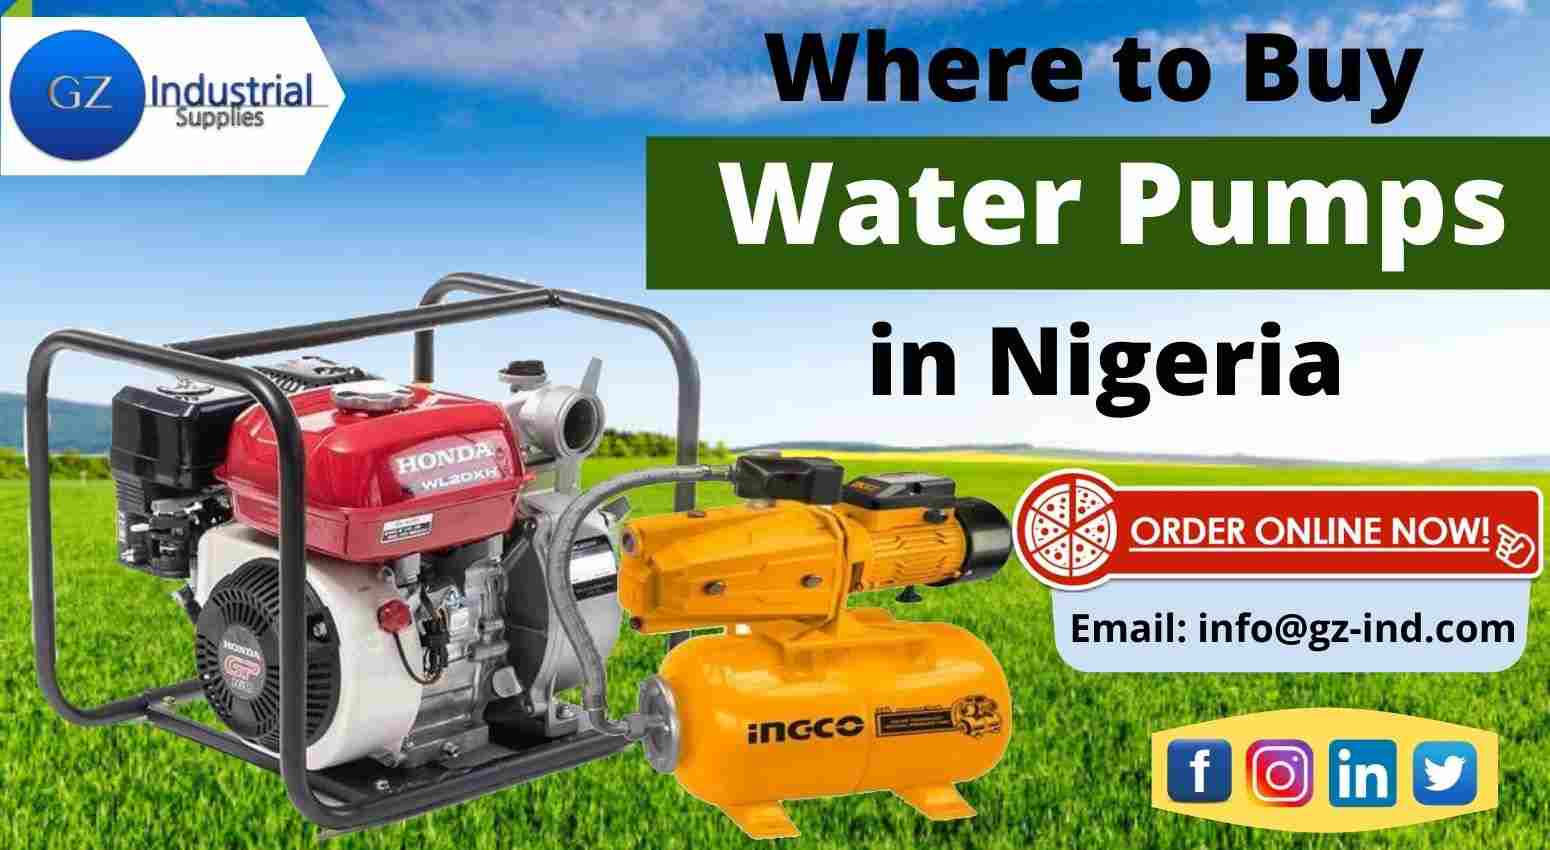 Where to Buy Water Pumps in Nigeria